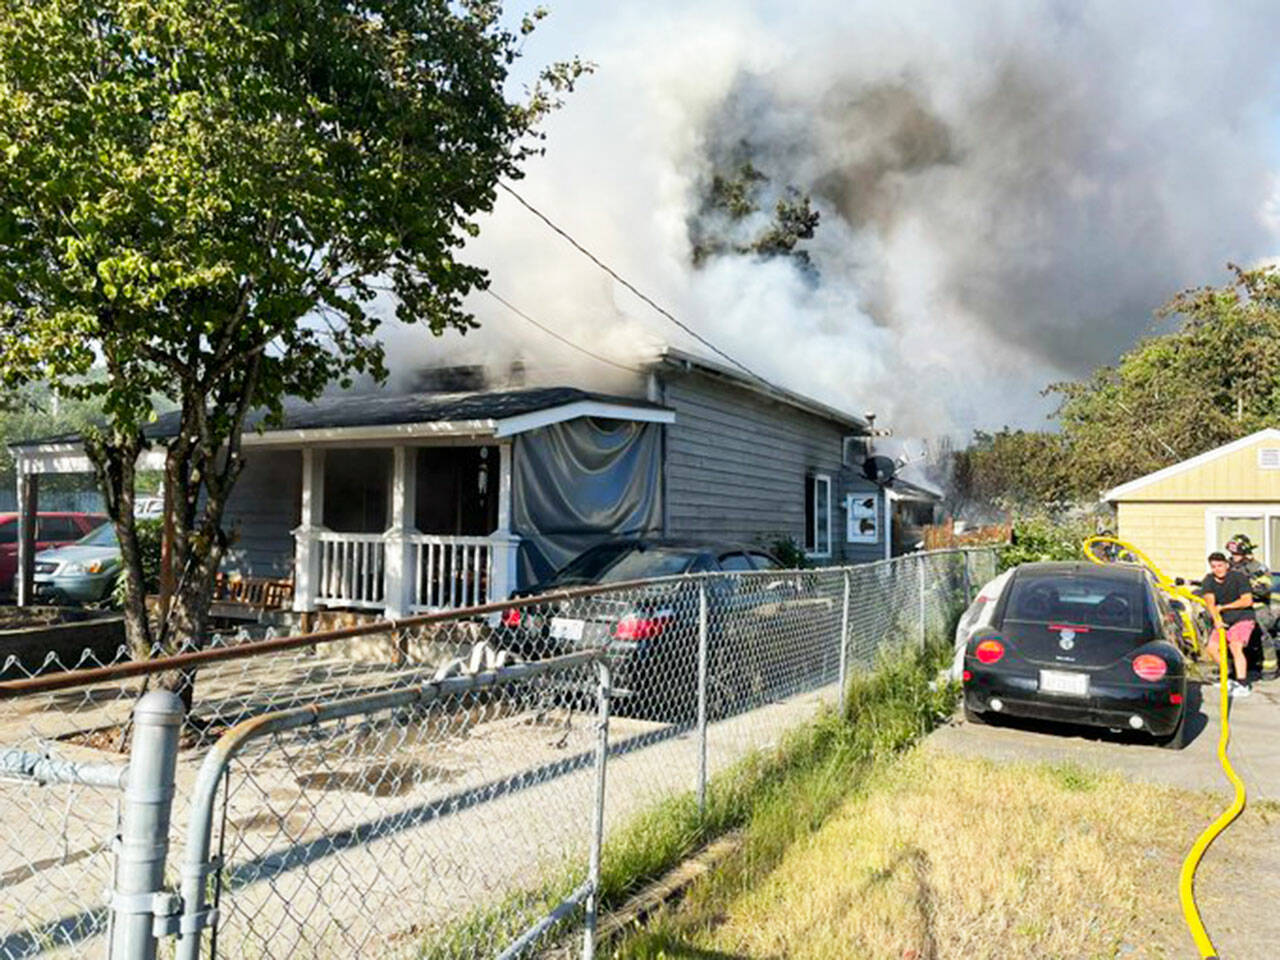 Firefighters extinguish a downtown Kent house fire Monday evening, June 27 in the 700 block of Railroad Avenue South. COURTESY PHOTO, Puget Sound Fire